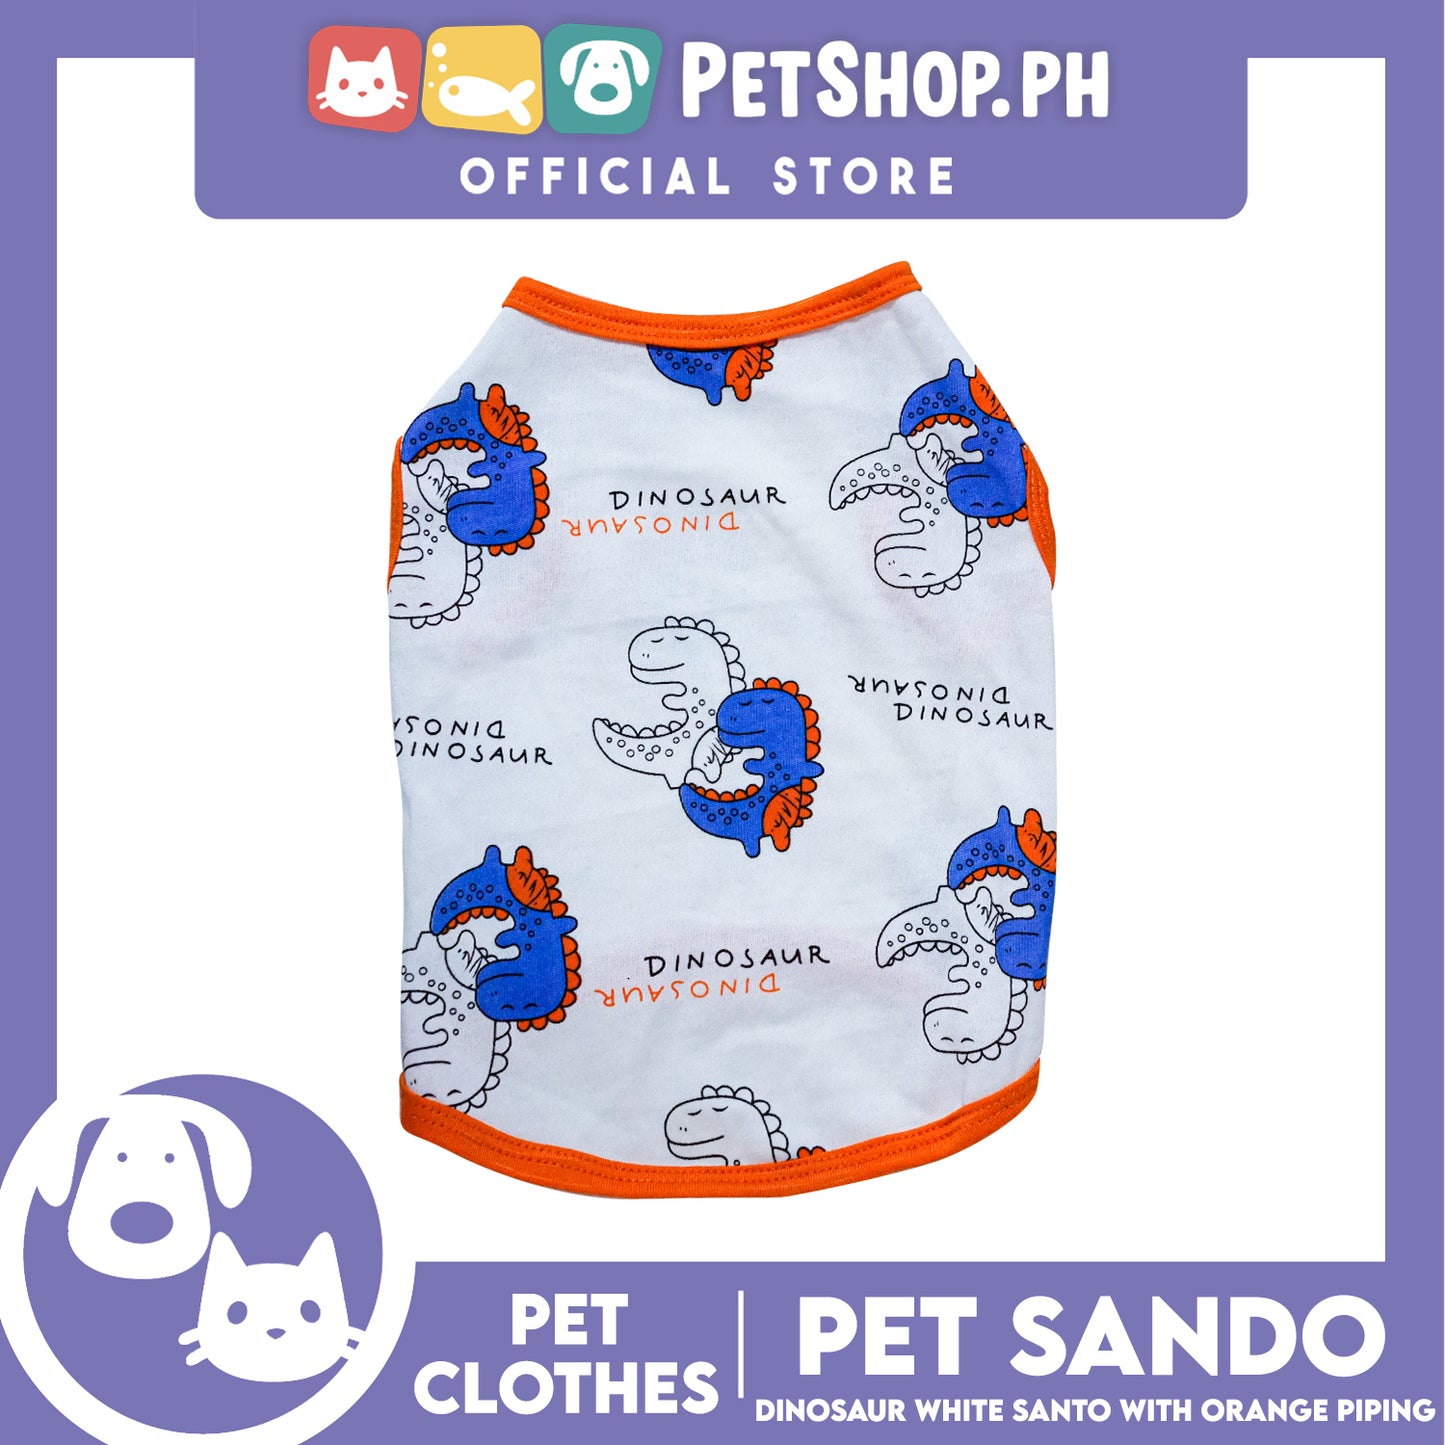 Pet Sando Dinosaur White with Orange Piping Sando (Small) Perfect Fit for Dogs and Cats